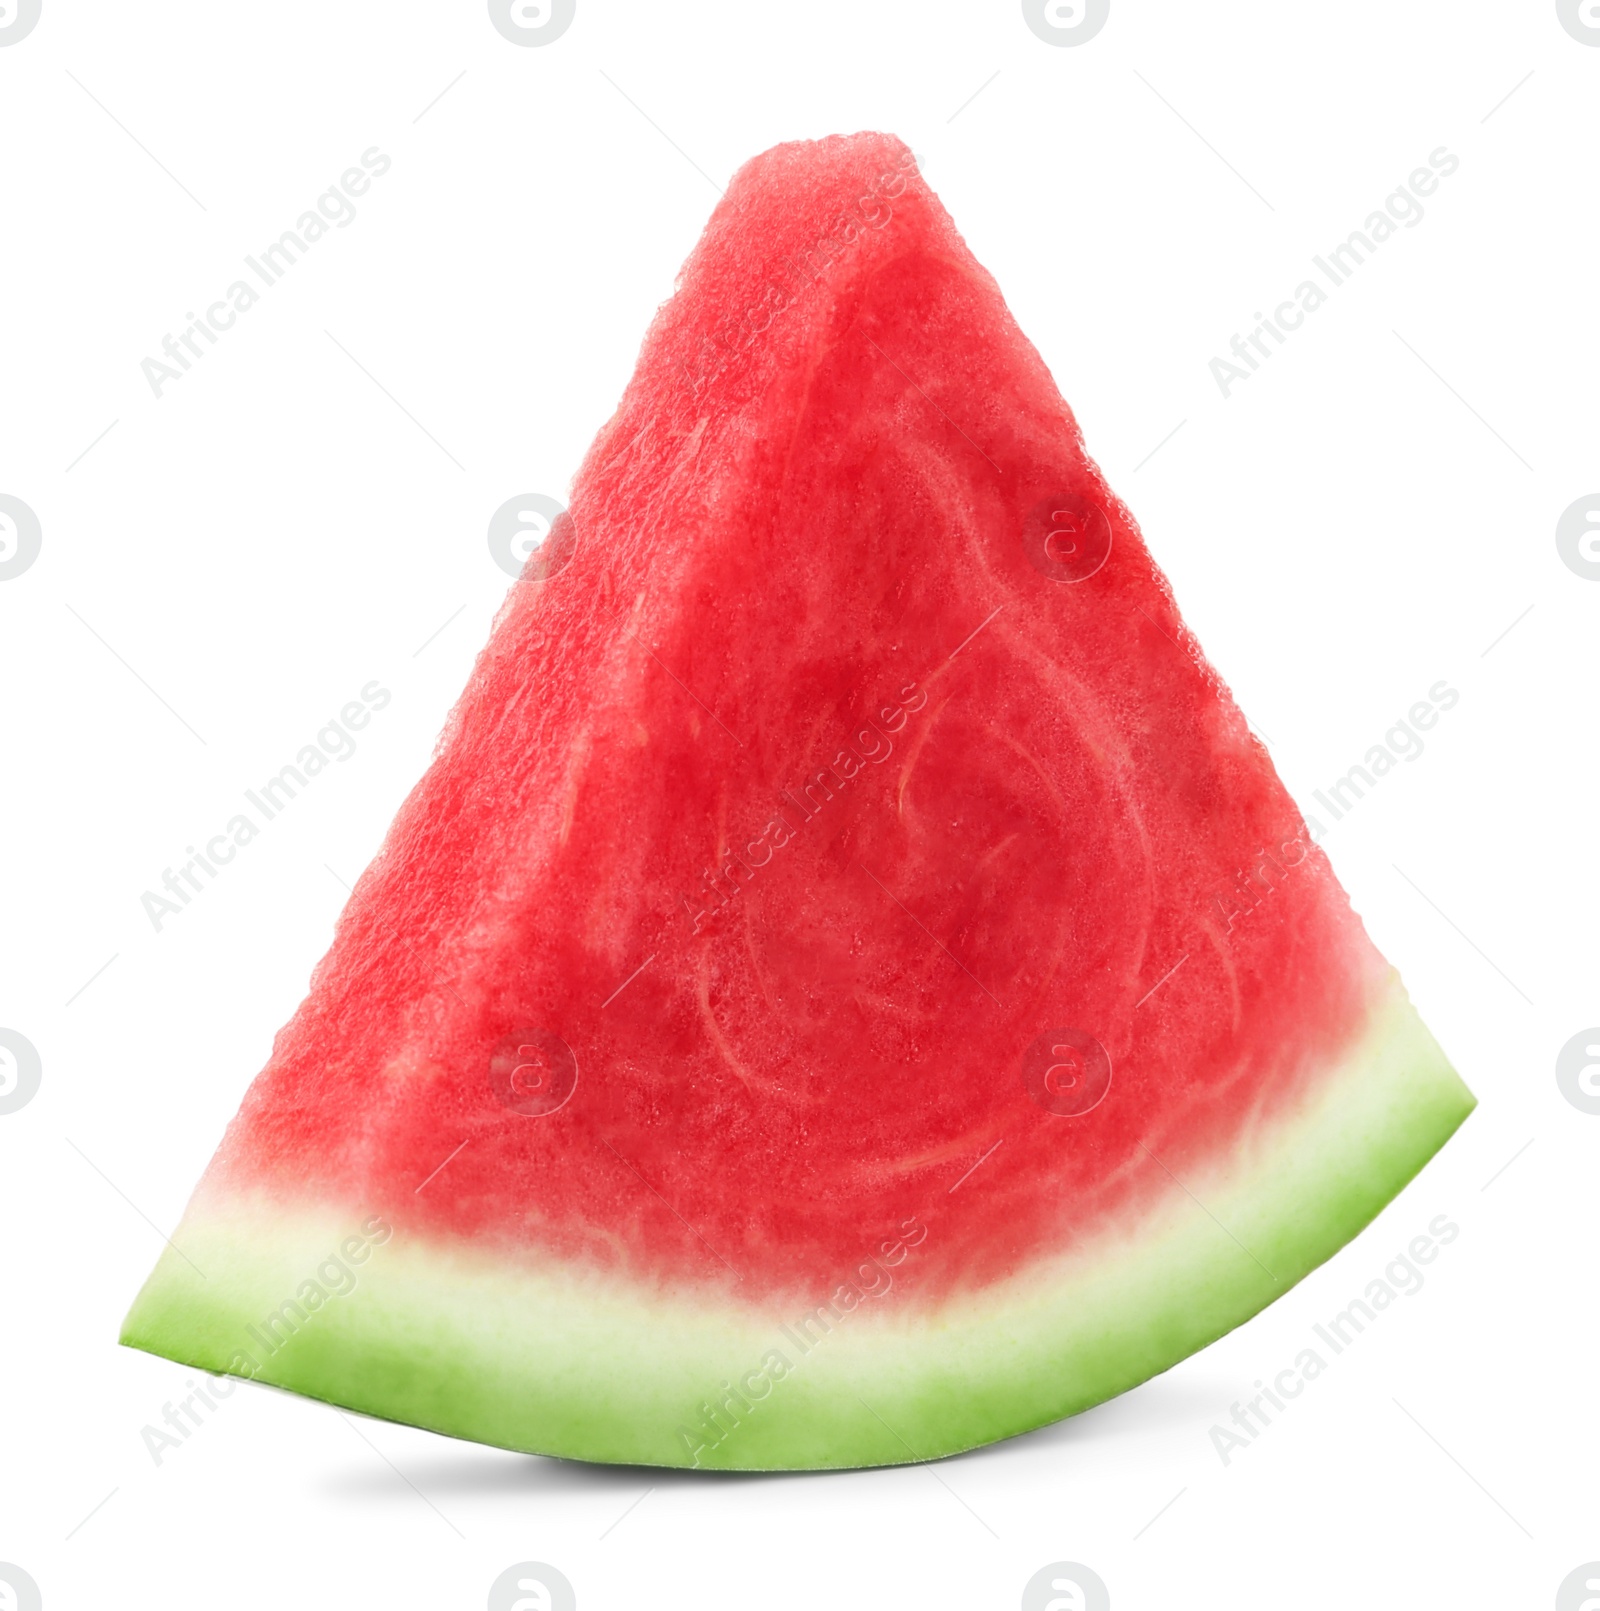 Image of Slice of delicious ripe seedless watermelon isolated on white